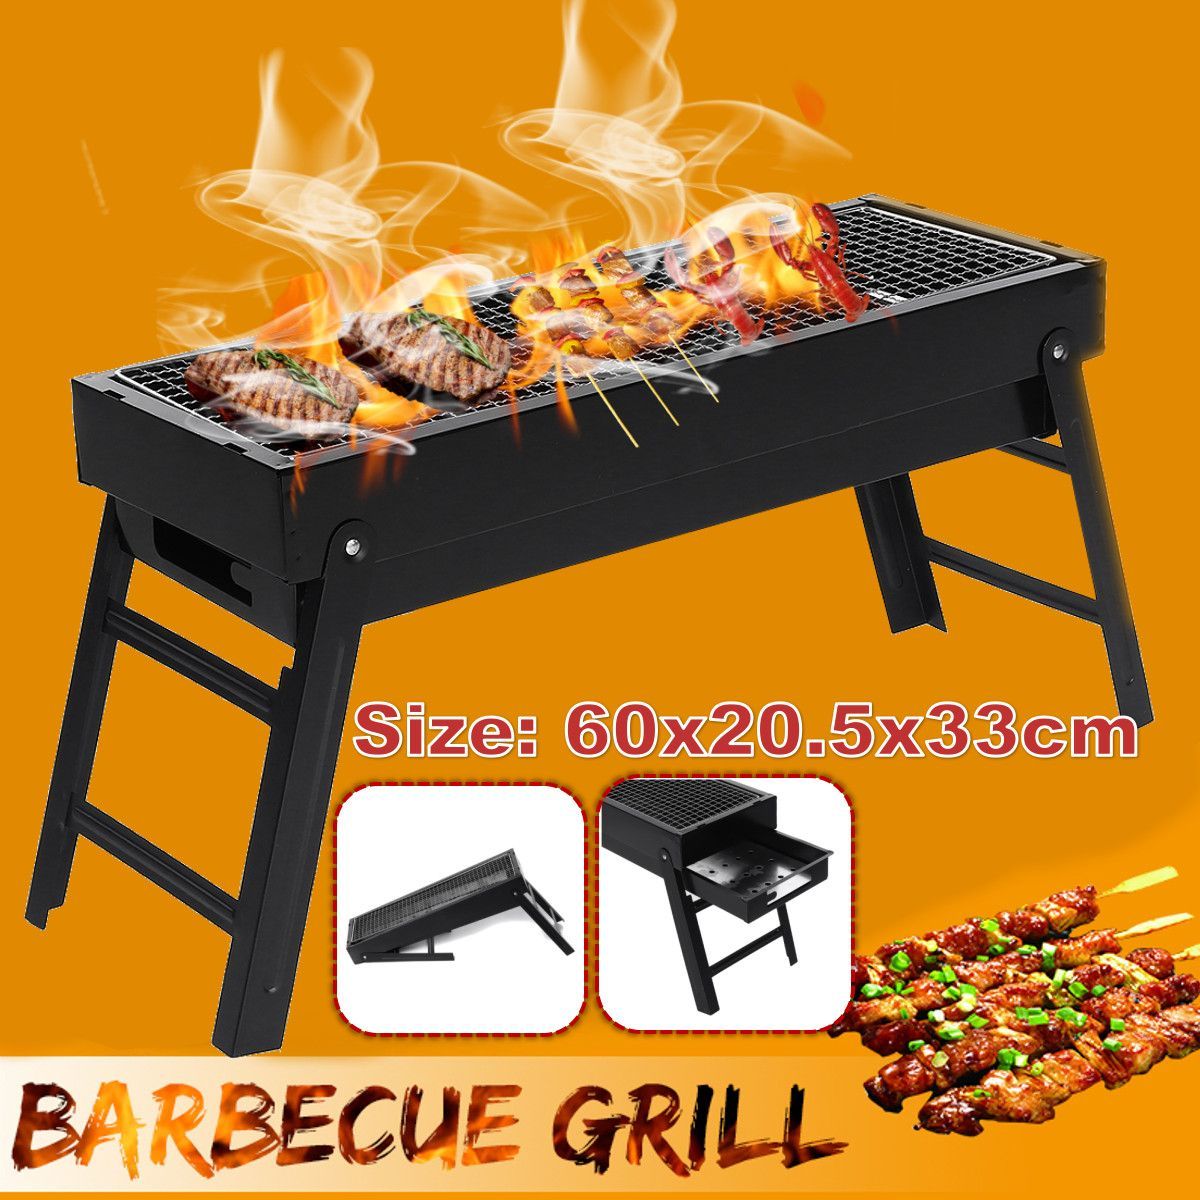 DIY-Portable-Folding-Fire-Pit-BBQ-Grill-Rack-Outdoor-Garden-Square-Camping-1685468